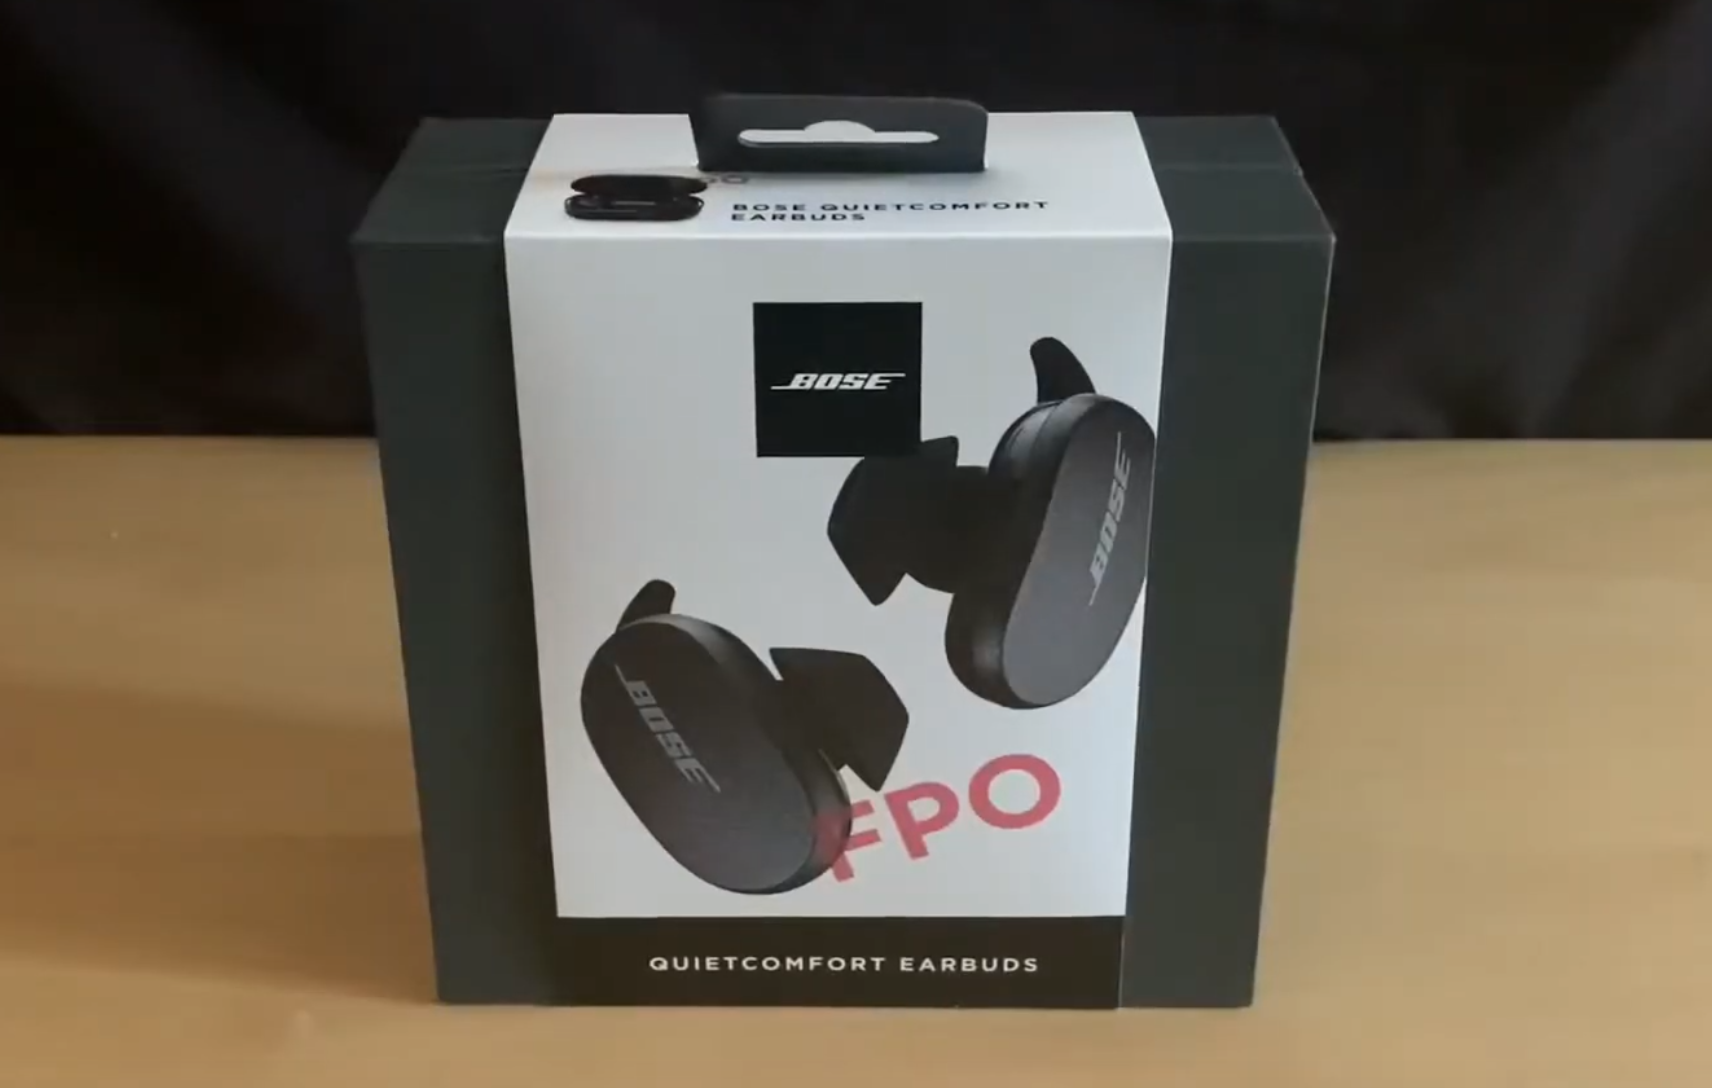 Bose's unreleased AirPods Pro competitor pops up on YouTube